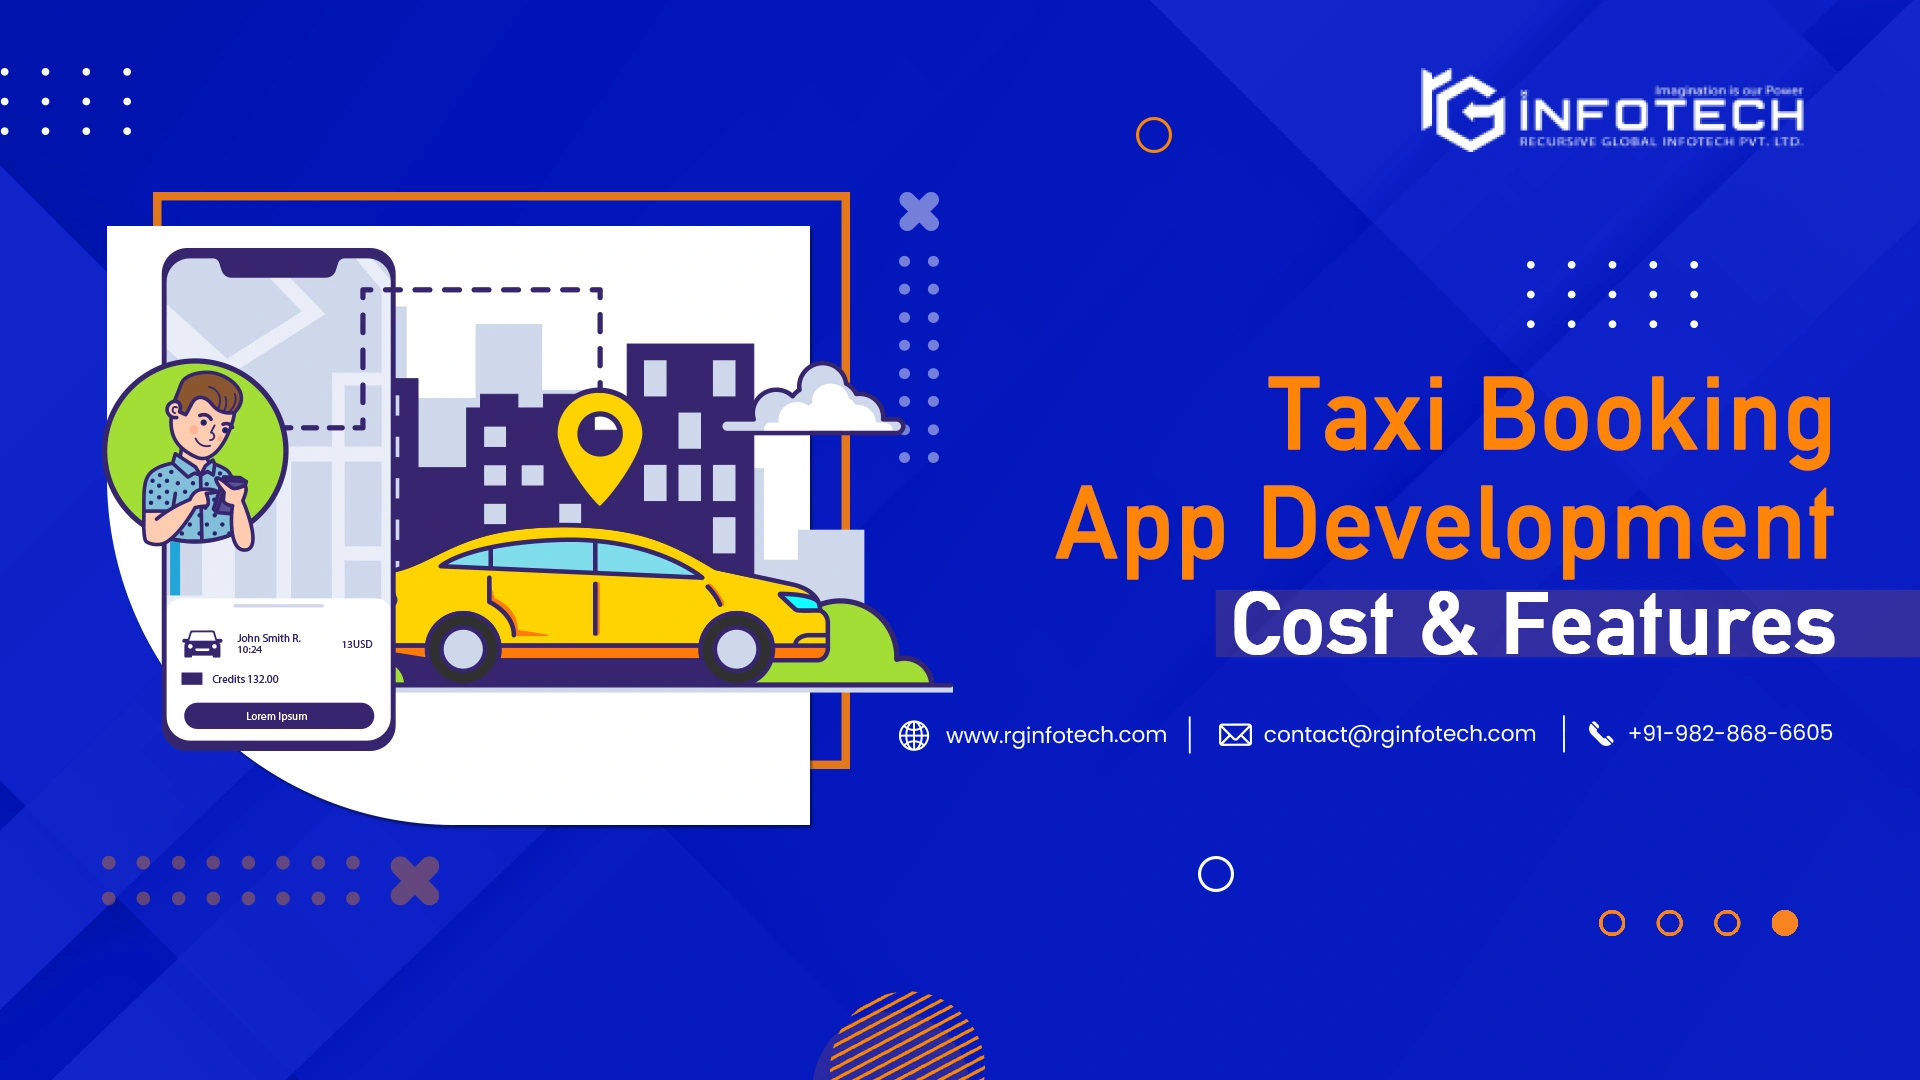 Taxi-Booking-App-Development-Cost